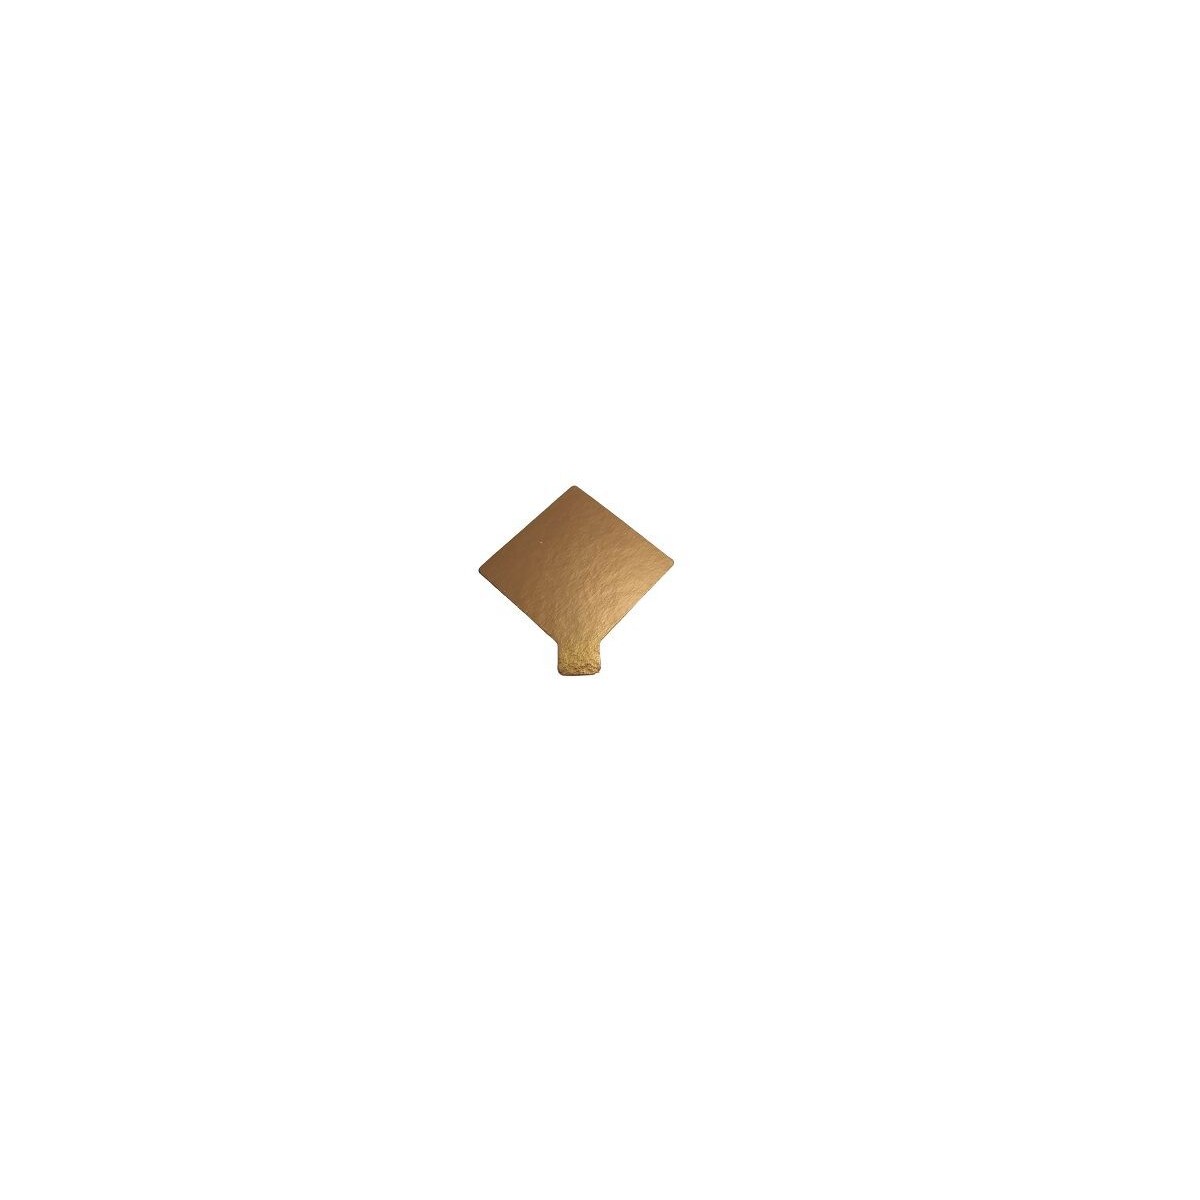 CAKE BOARD SQUARE GOLD 7,5 X 7,5CM 250 PIECES FOSTPLUS INCLUDED  BOX